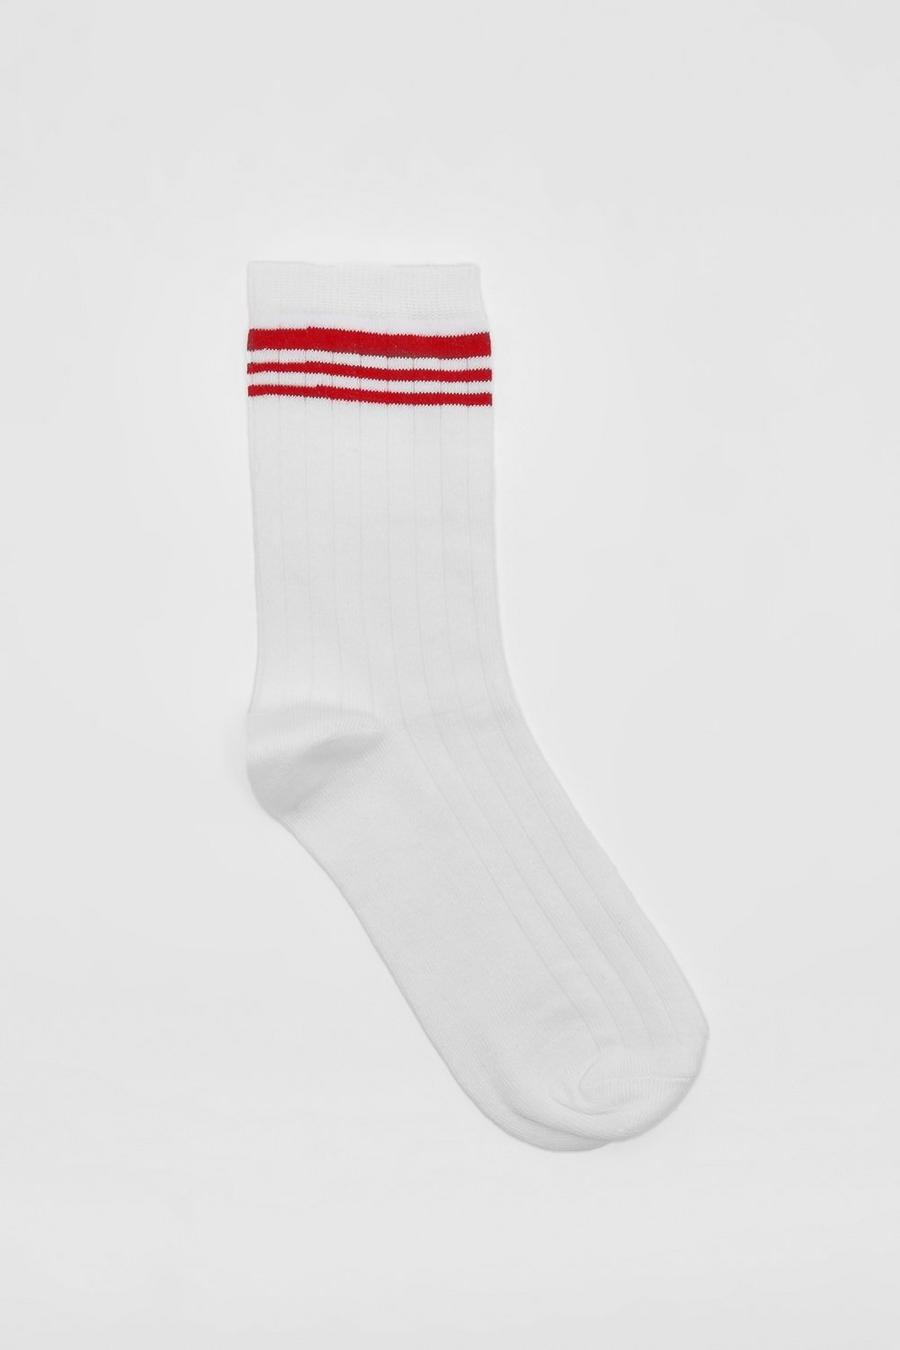 Chaussettes à rayures, Red